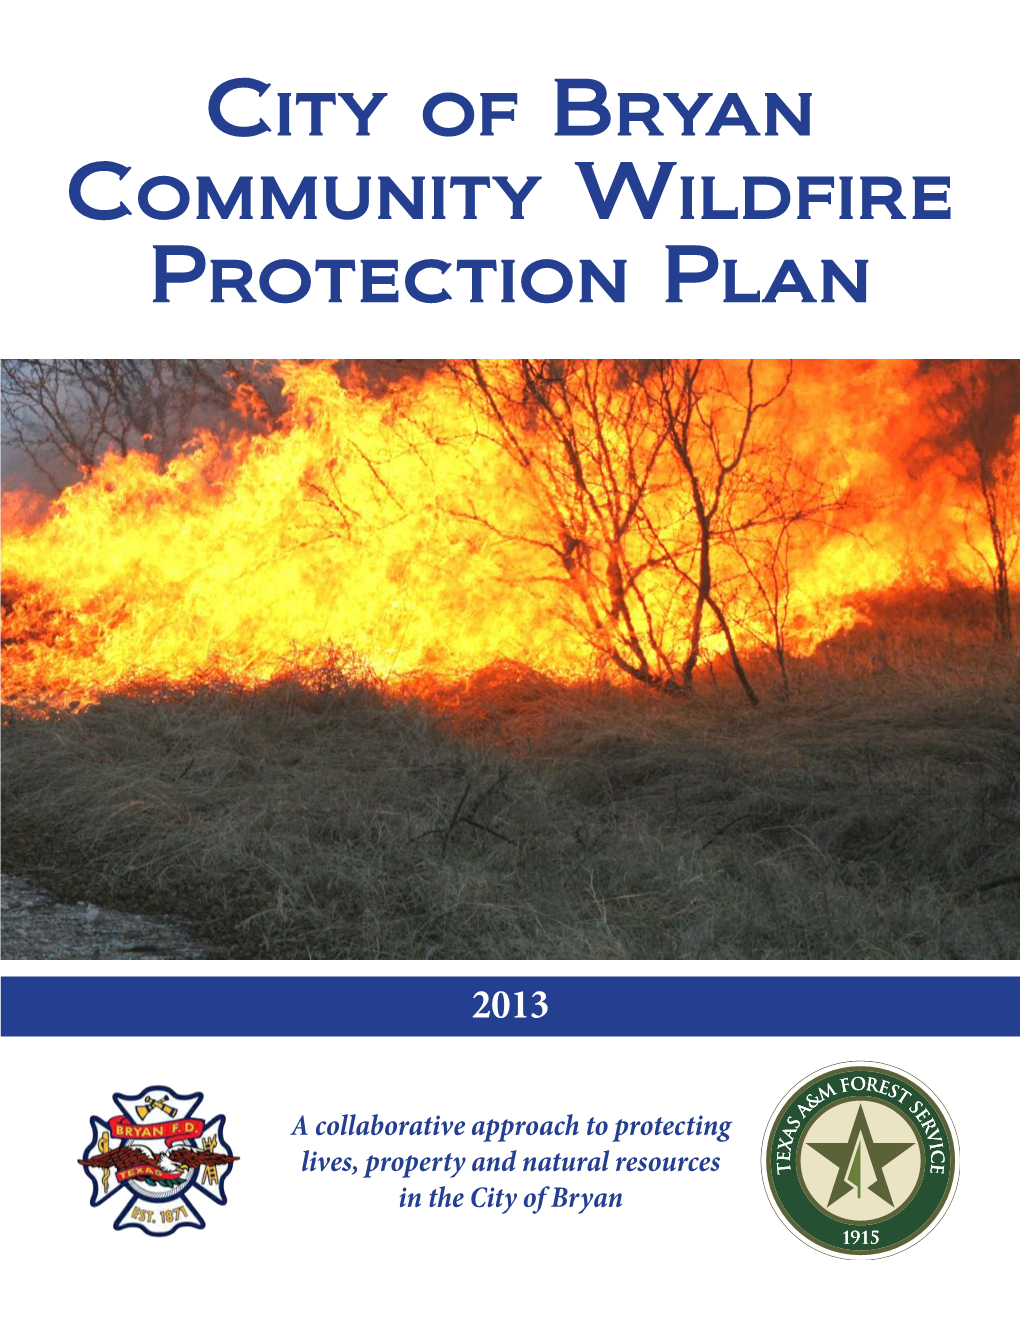 City of Bryan Community Wildfire Protection Plan